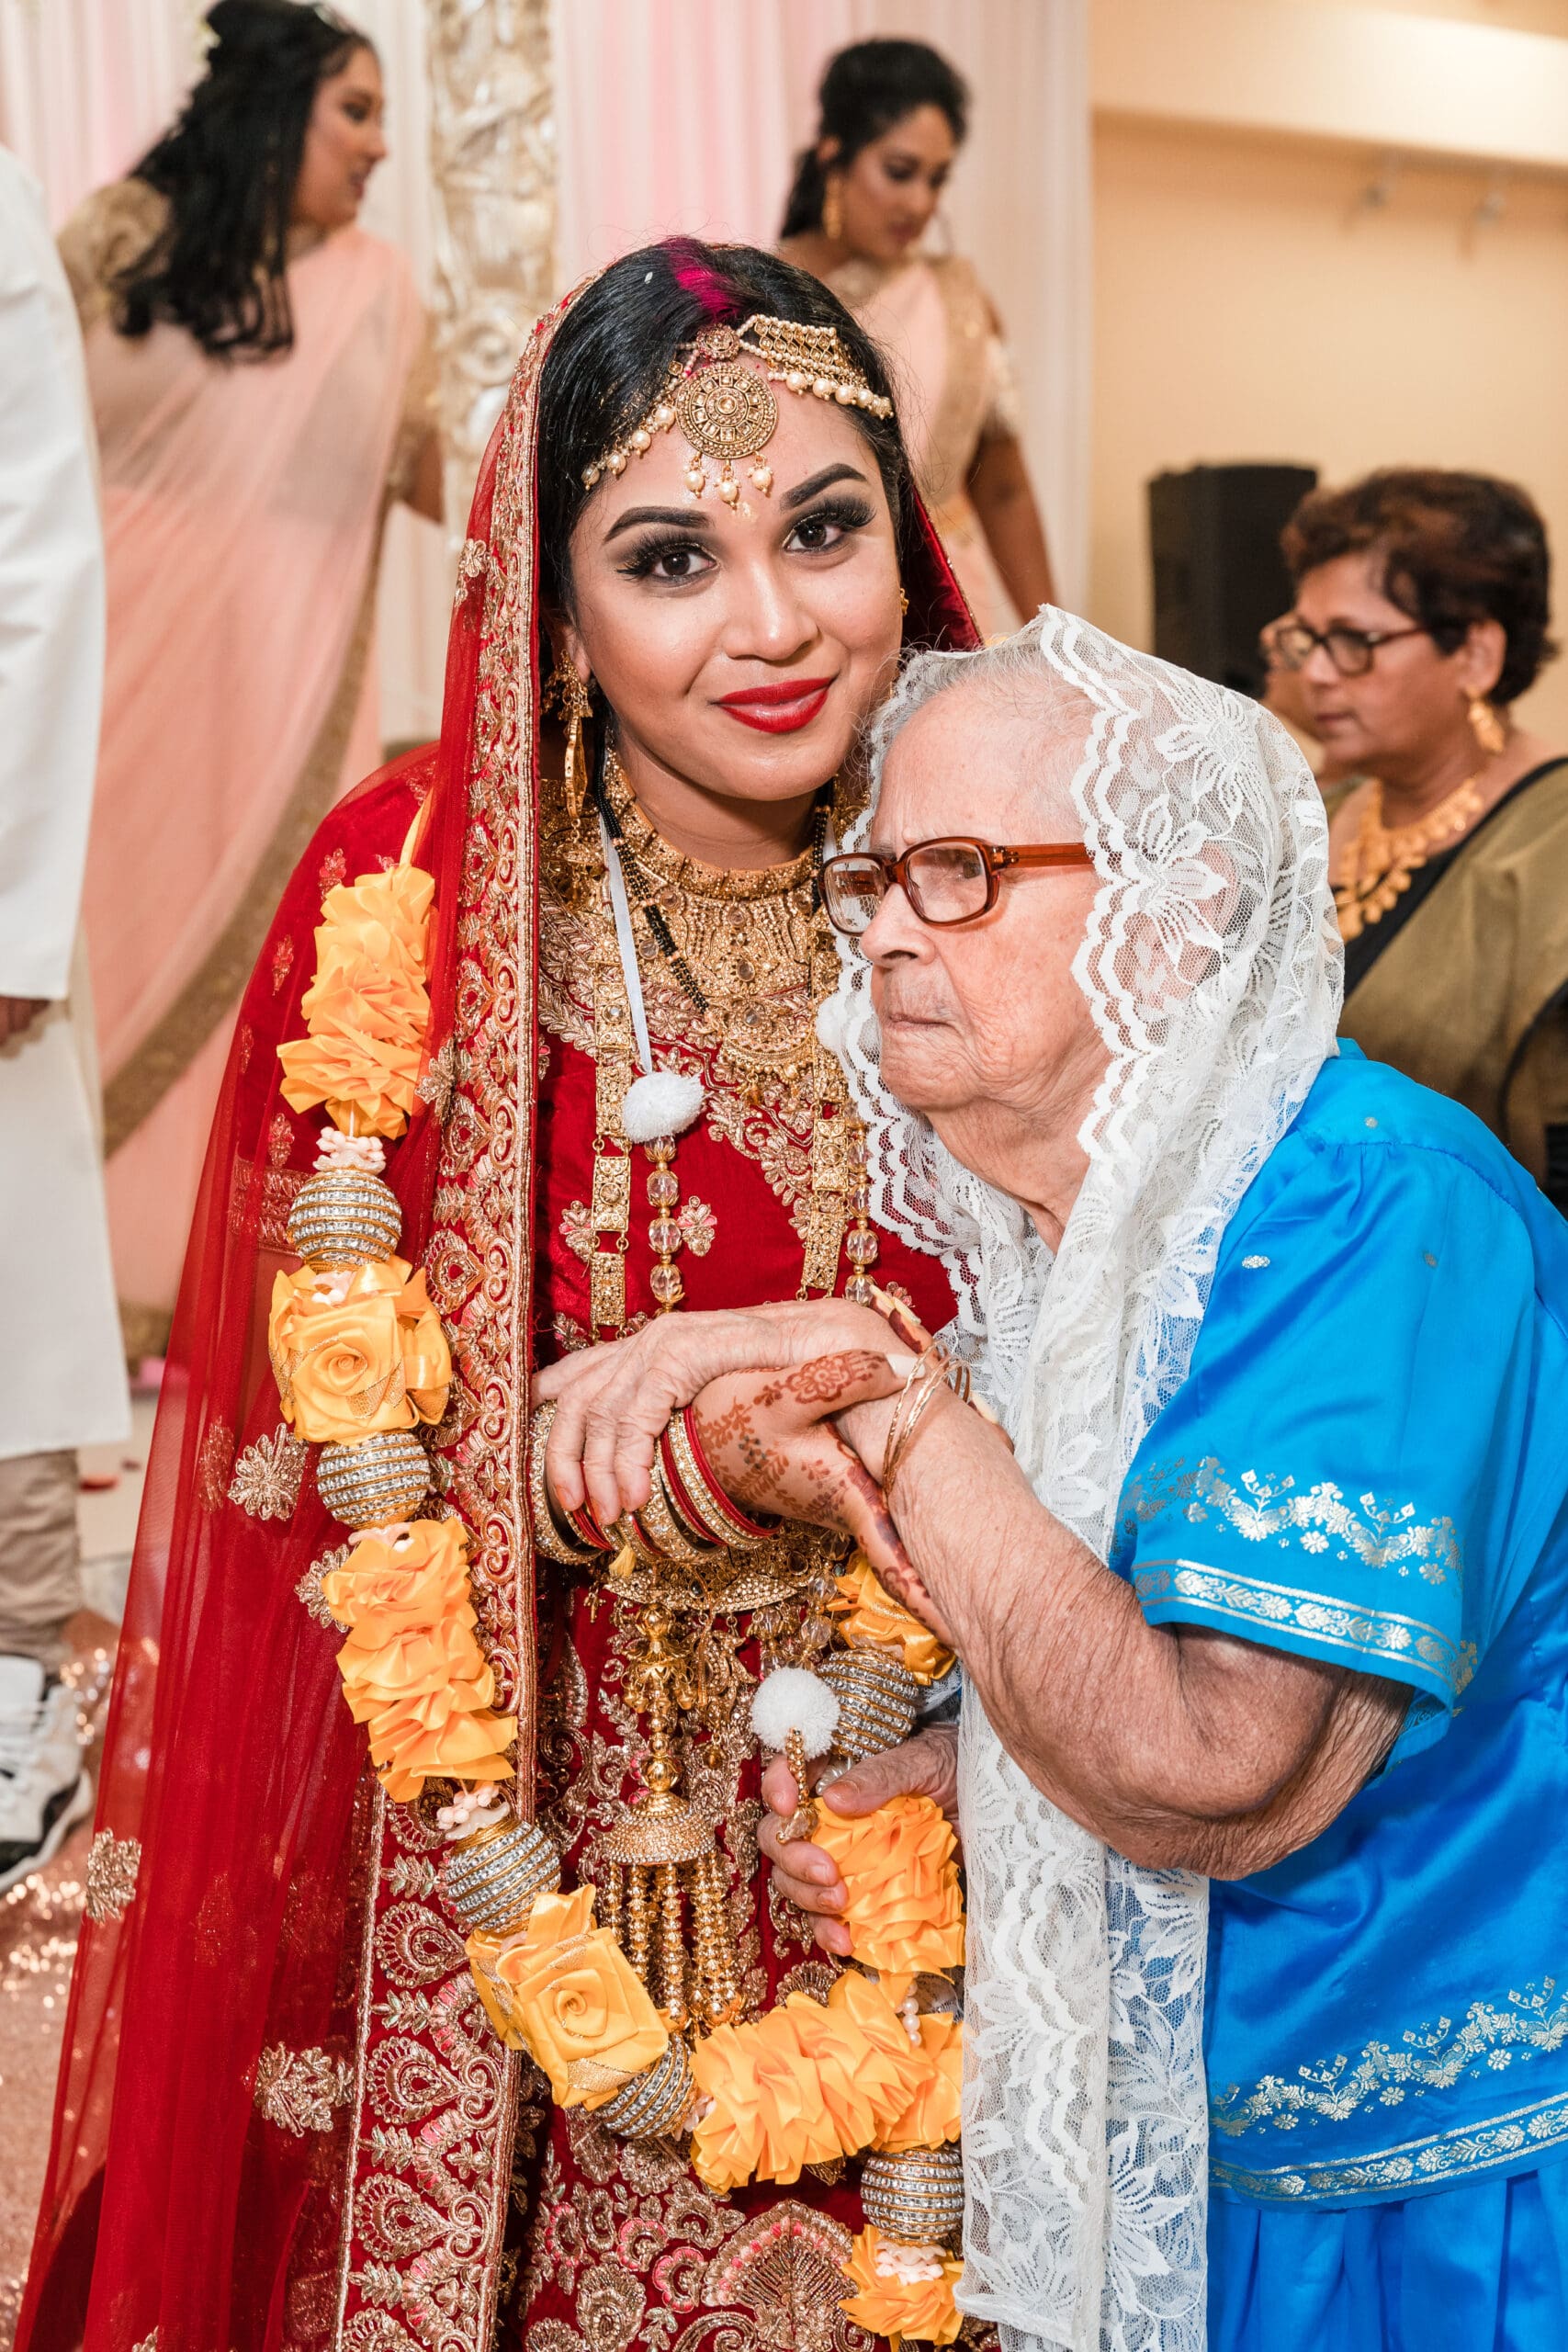 Bride wearing traditional cultural attire stands affectionately with her grandmother, sharing a moment of love and heritage